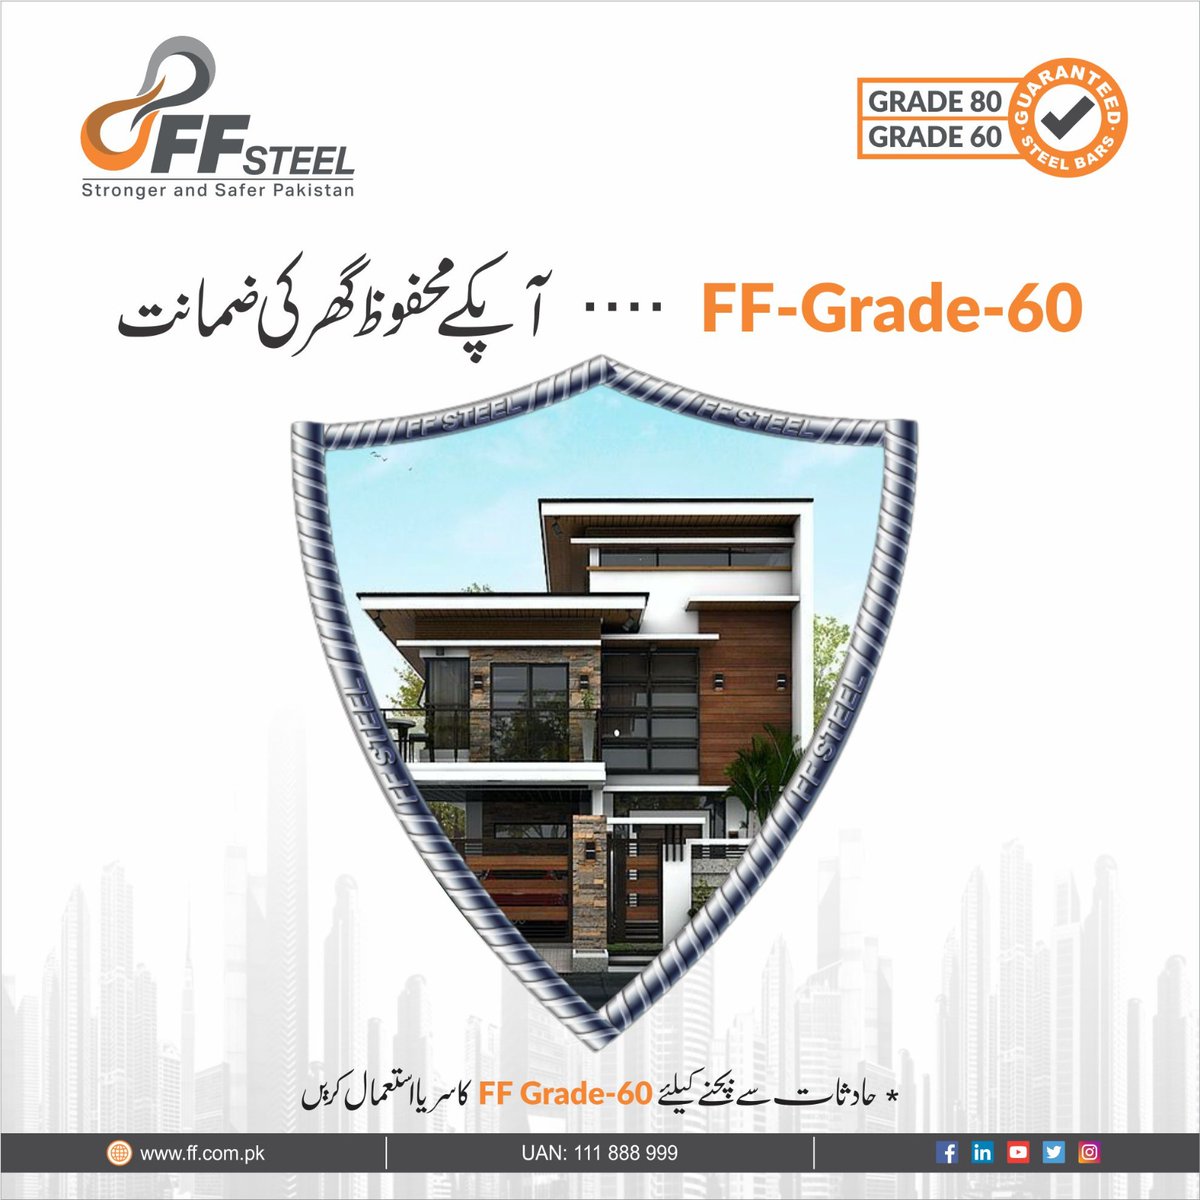 The promise of providing safety to your home.

#FFSteel #strongerandsafer #Grade60SteelBars #Grade80SteelBars #Contractors #Consultants #BuildingMaterial #Architects